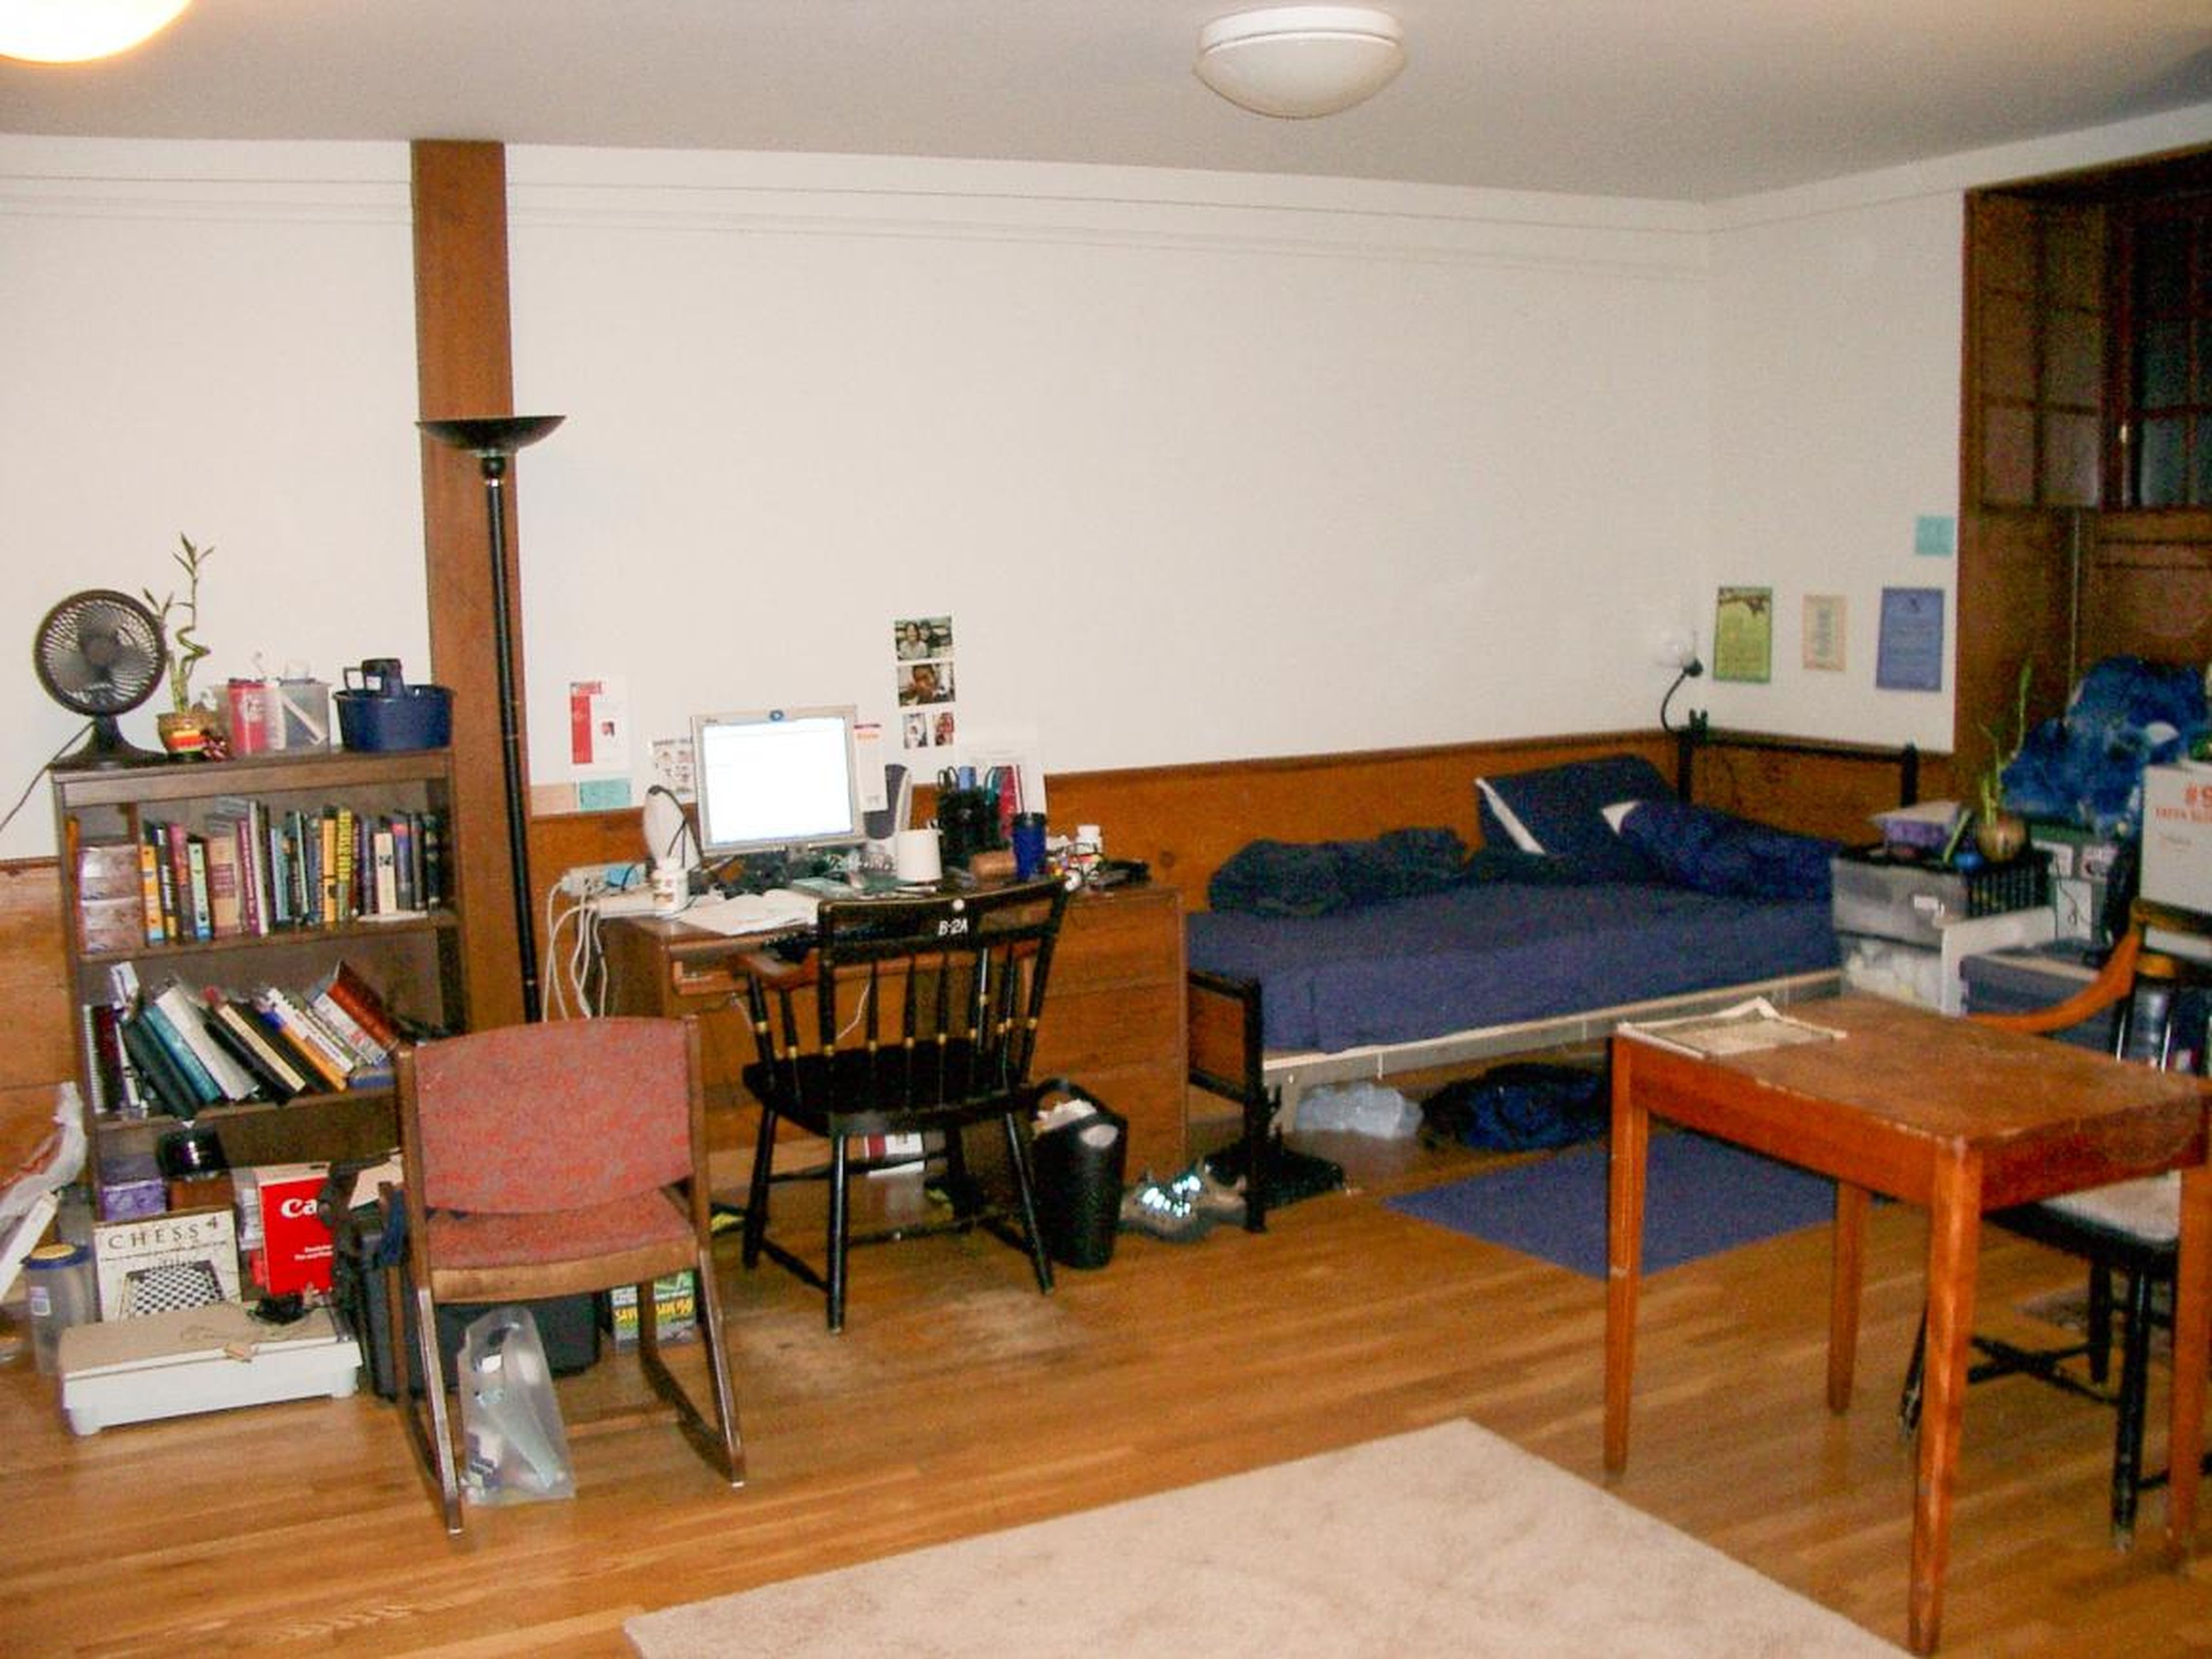 Other dormitories, like the first-year house of Stoughton, feature a large single room layout with two beds.